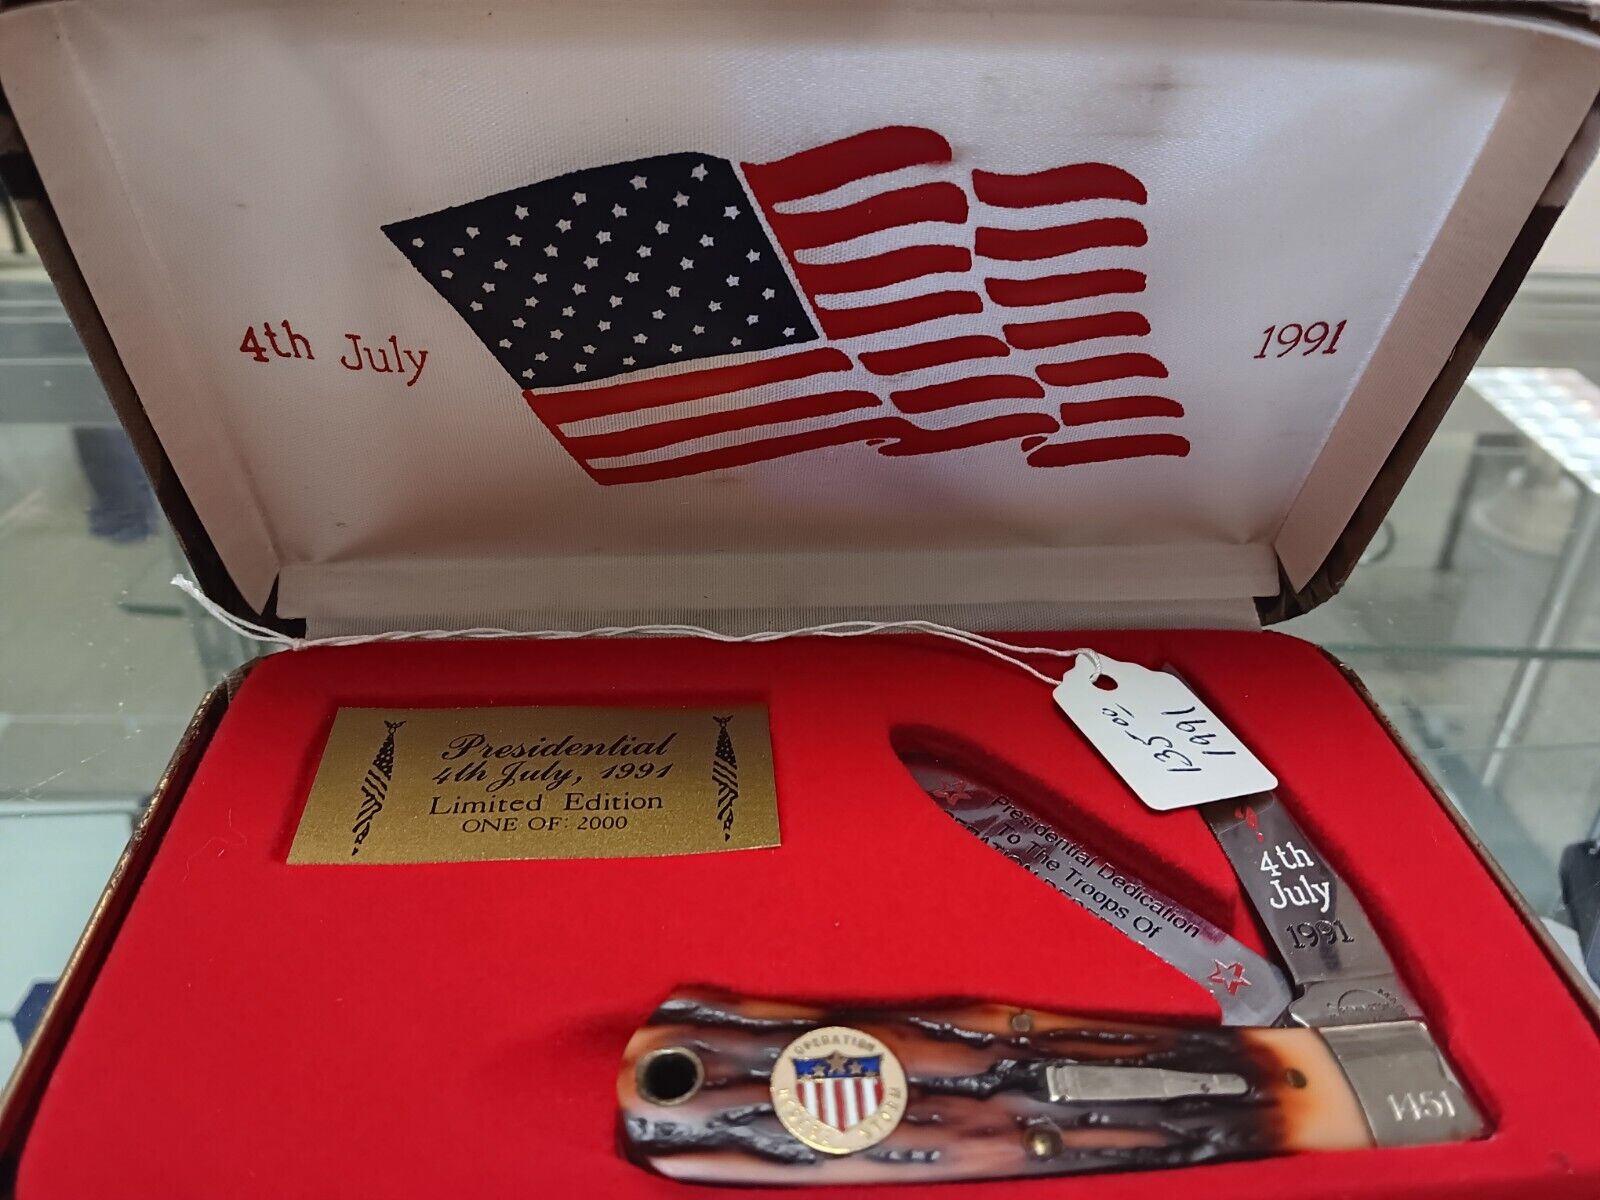 Presidential 4th July 1994 Limited Edition Commemorative Knife.